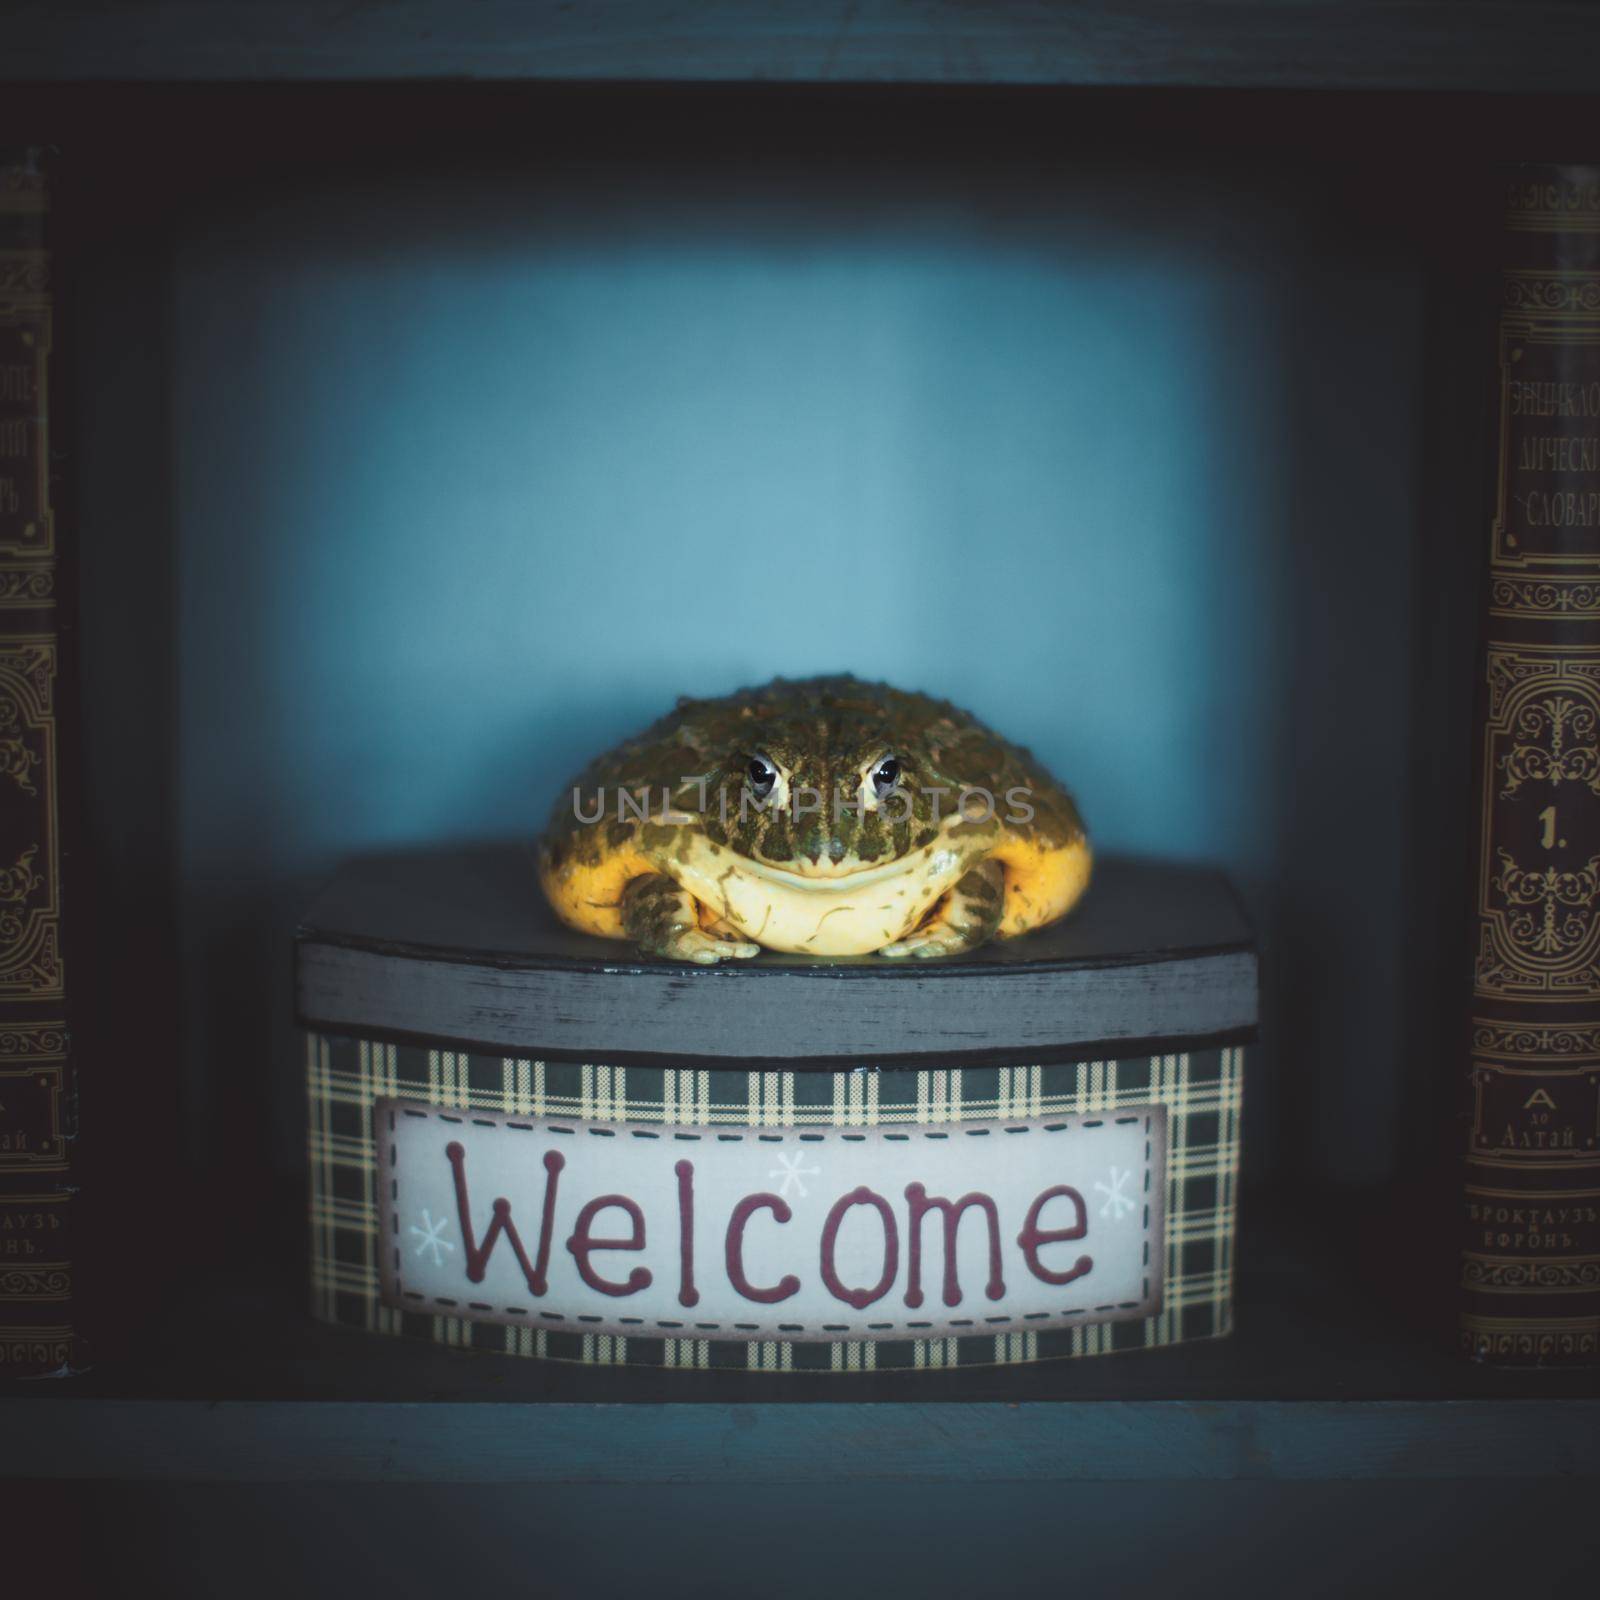 The wise African bullfrog in library on box by RosaJay